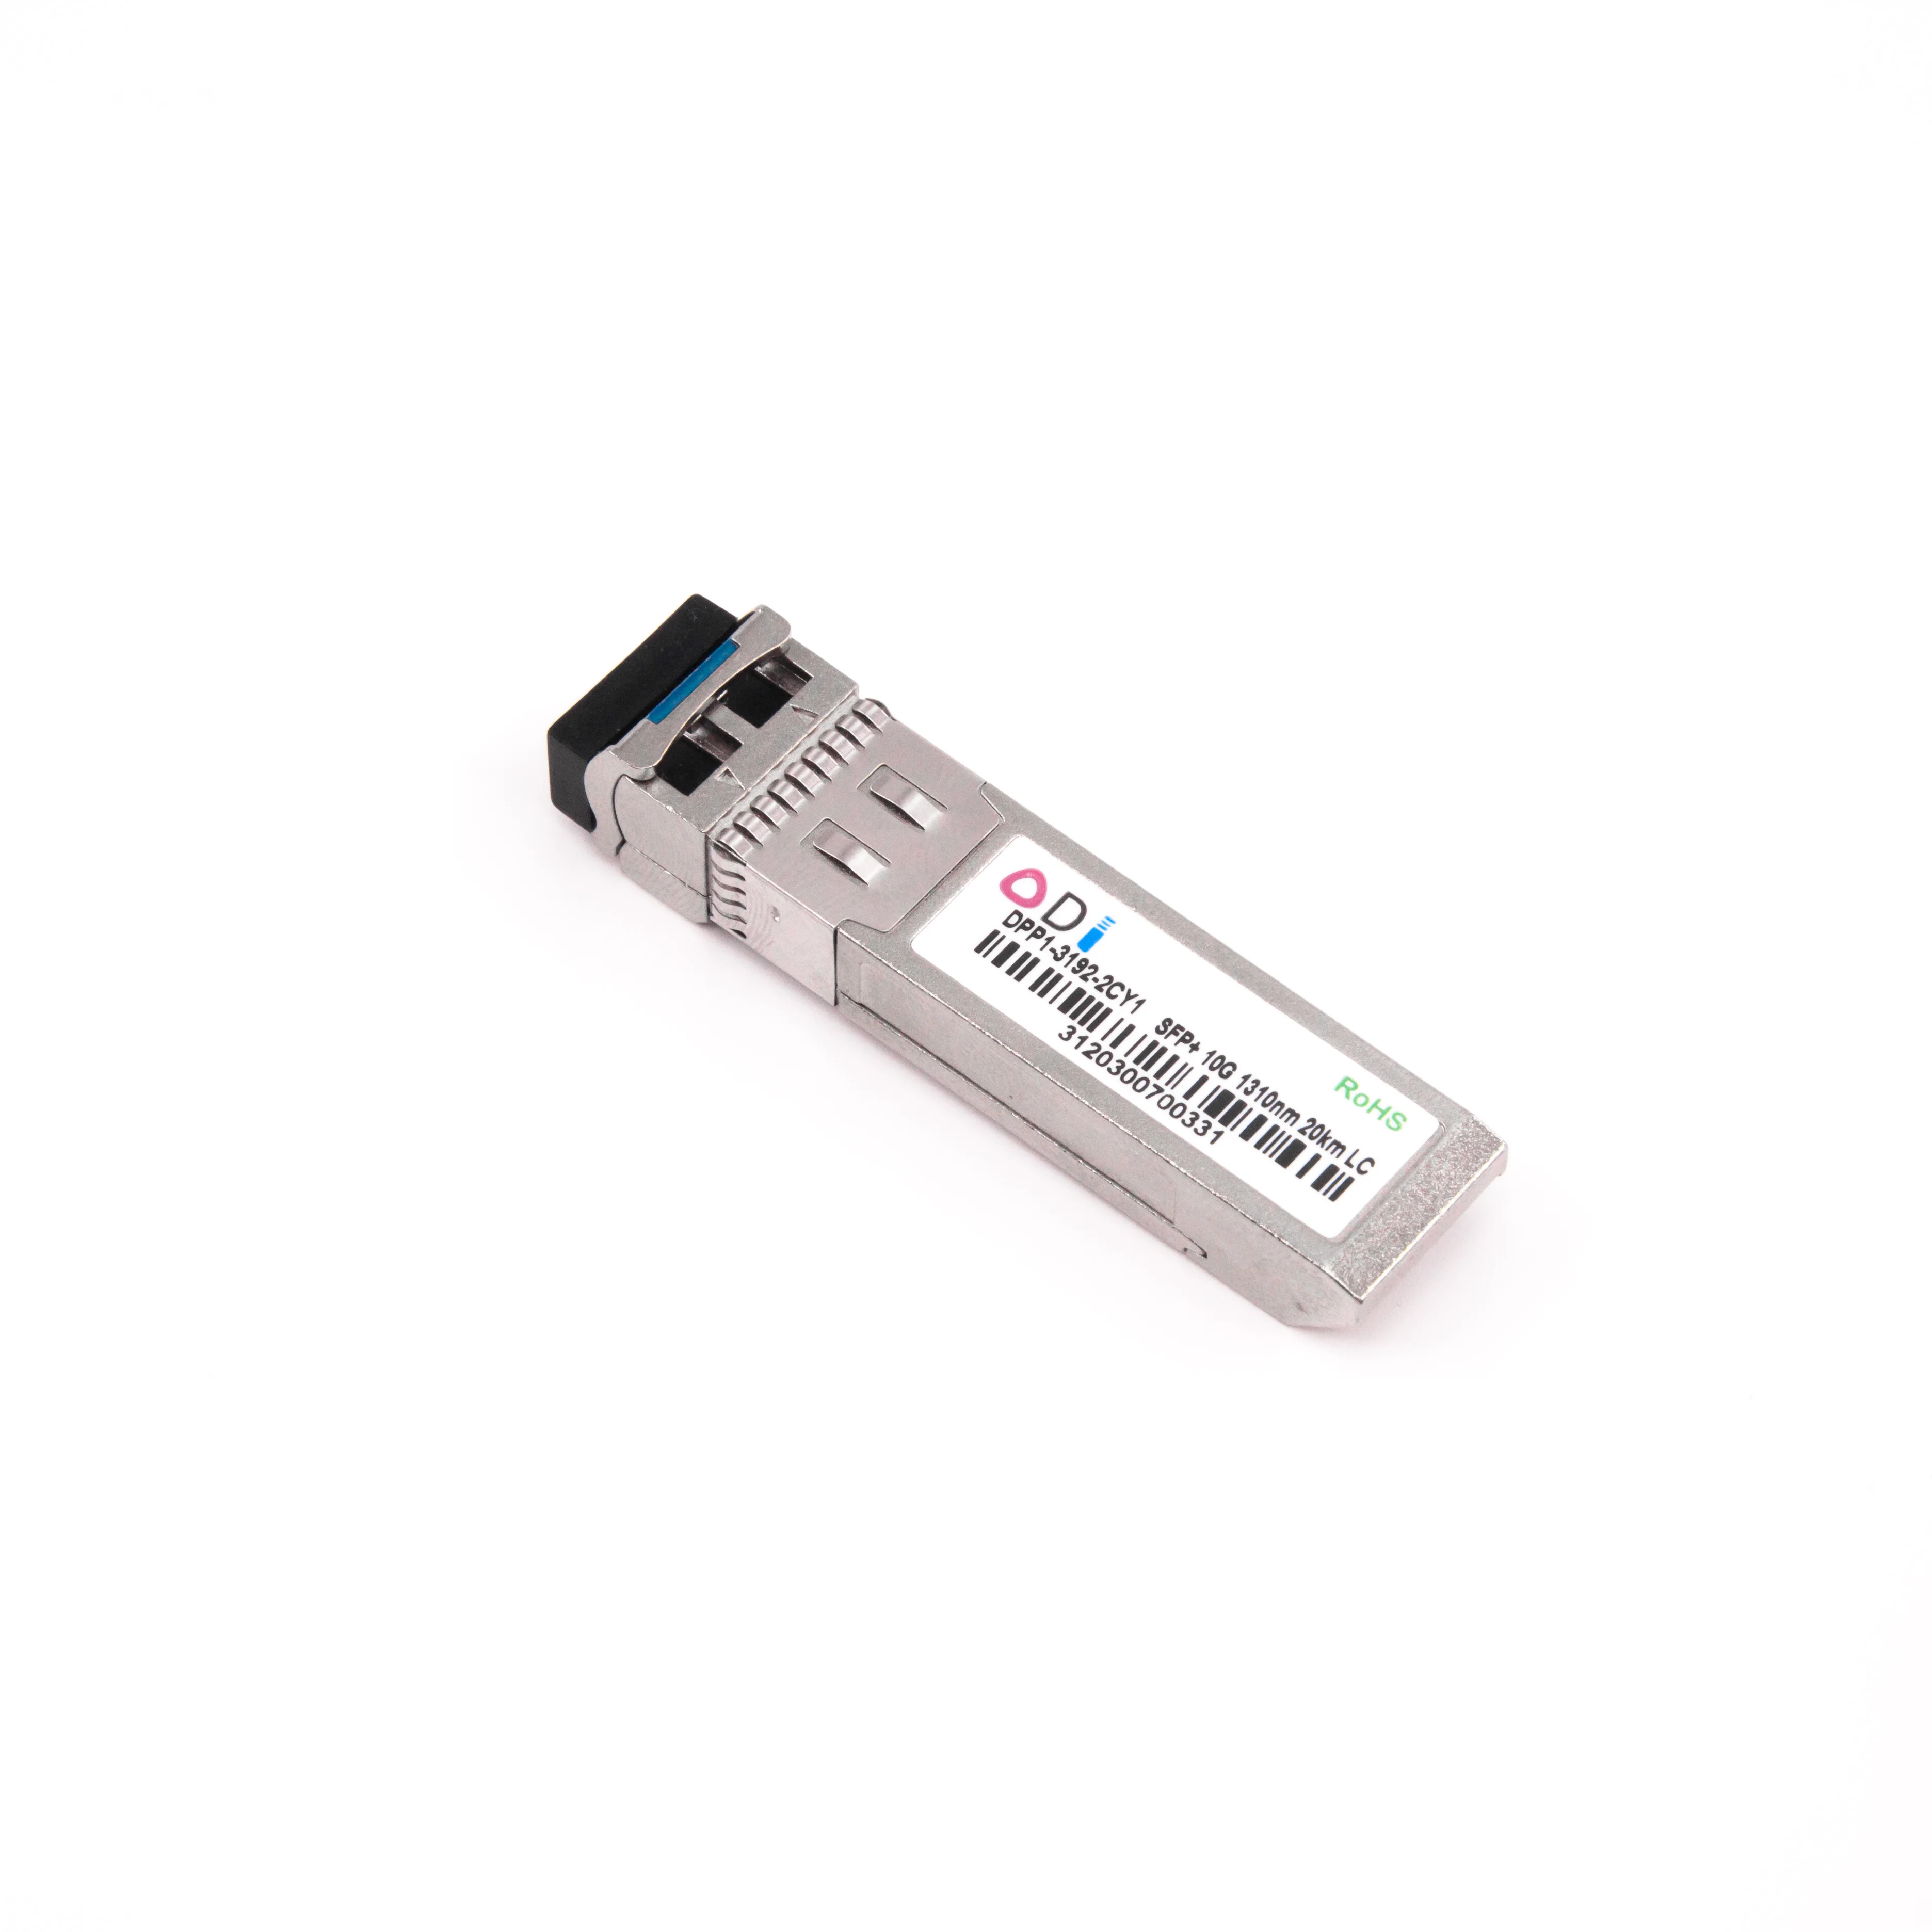 

10G SFP+ optical module 20km 1310nm DDM Transceiver Module compatible with CS JP H3C and more